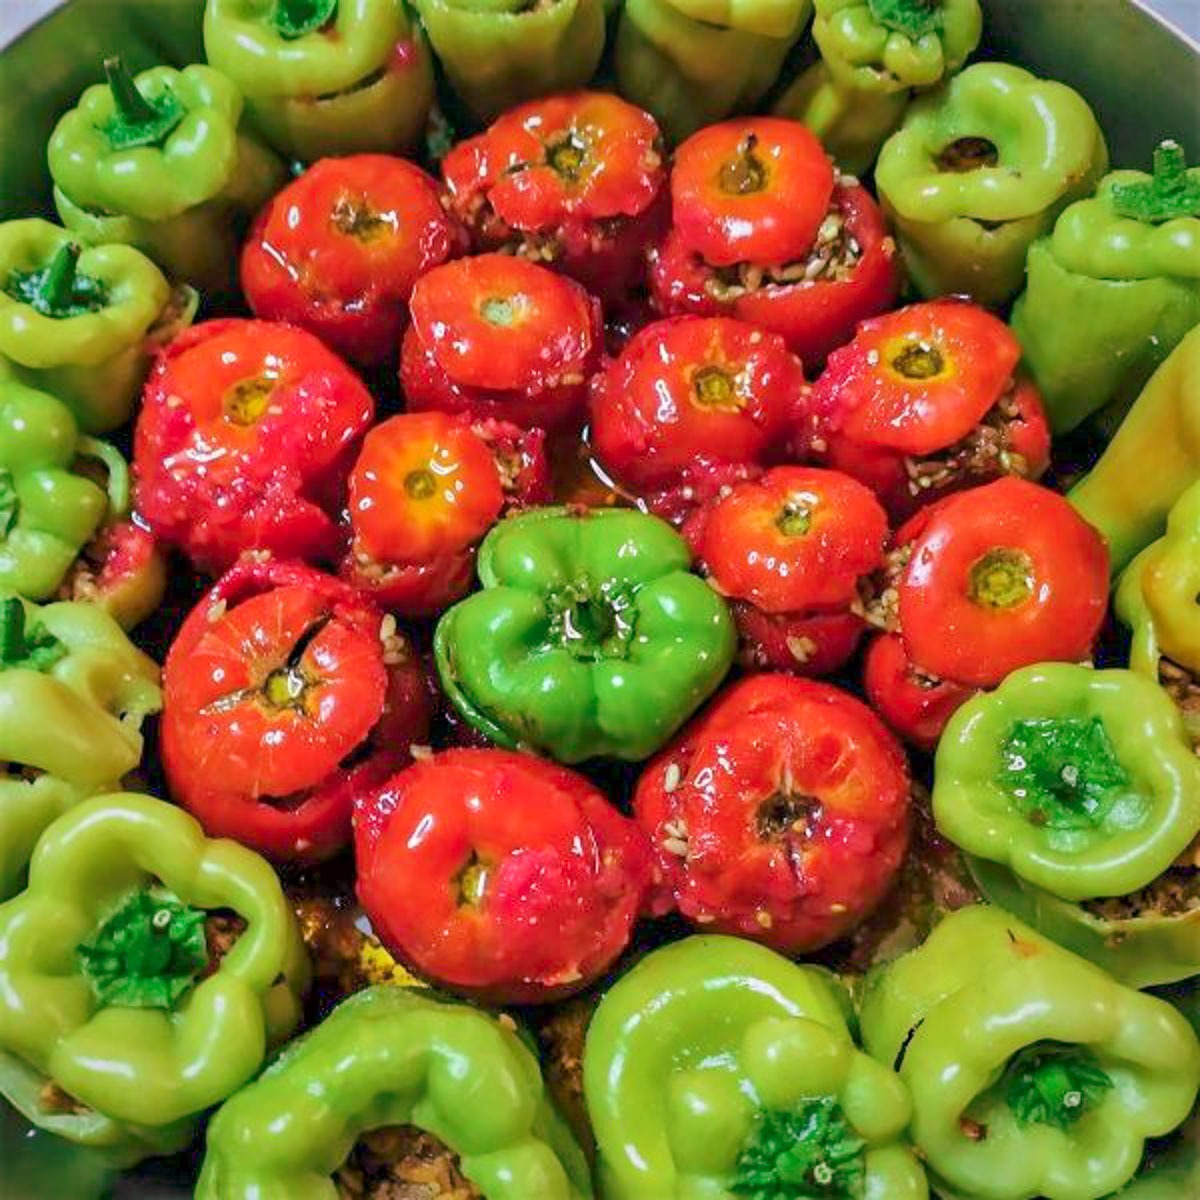 Gemista before they are cooked - Greek stuffed tomatoes and peppers